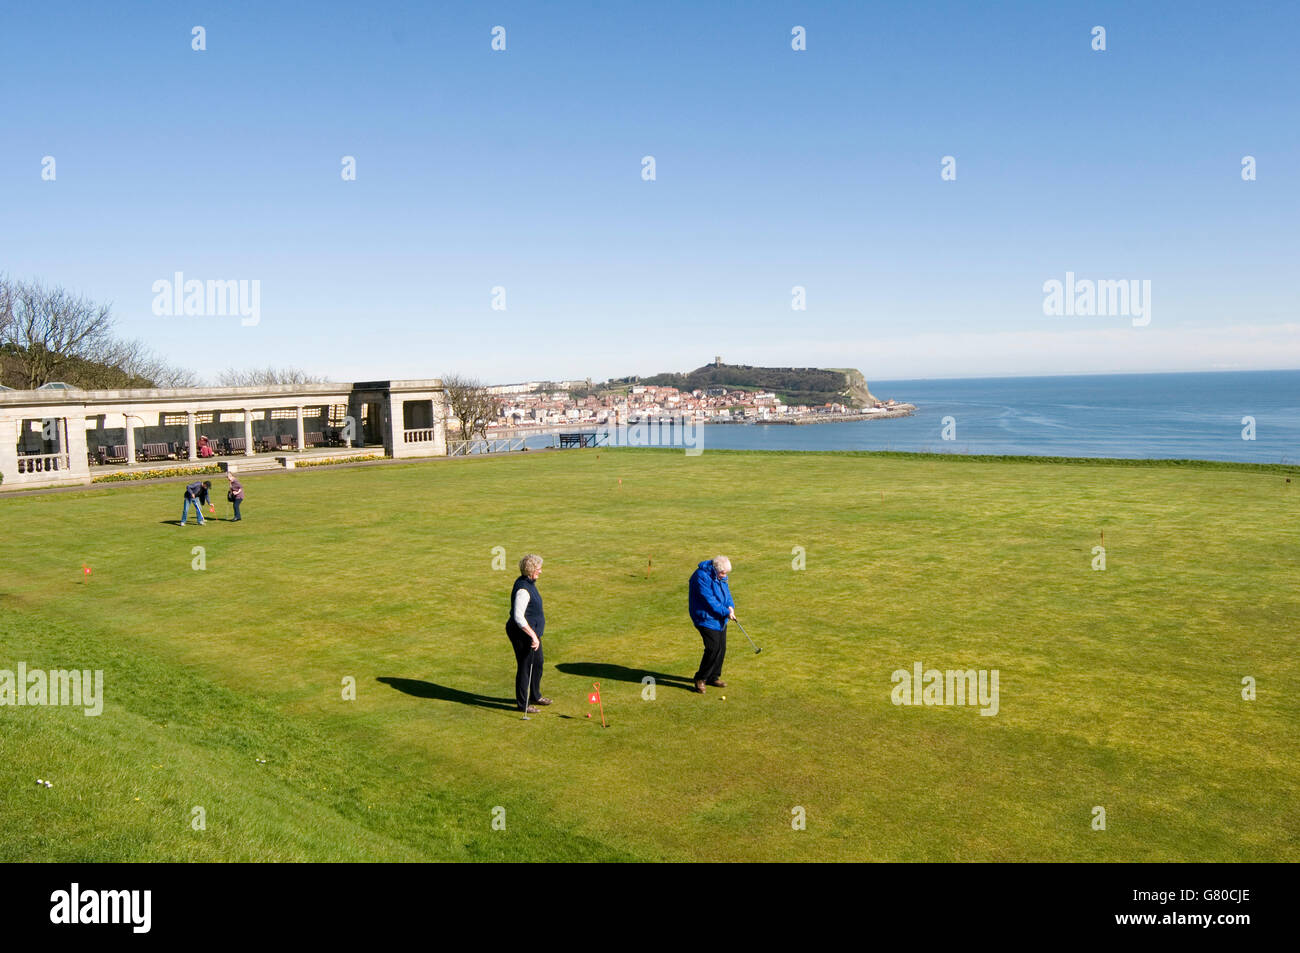 golf course courses putt putting green greens pitch and Scarborough bay north yorkshire sea north uk grass seaside golfer golfer Stock Photo